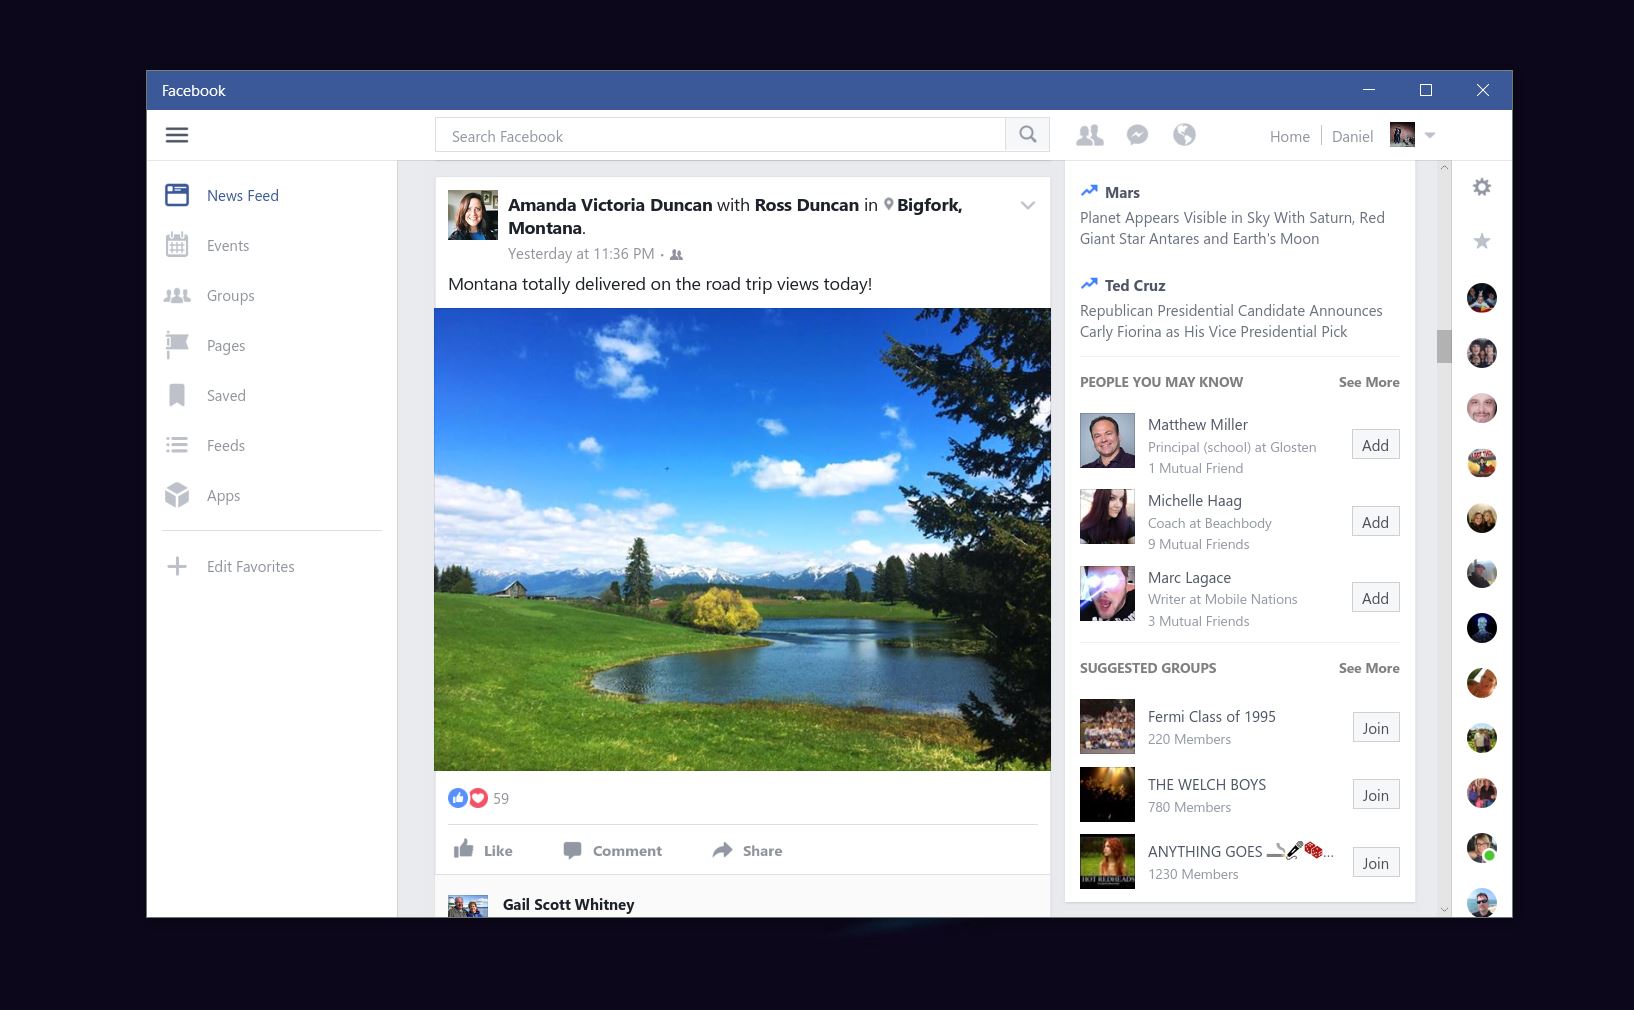 Facebook for Windows 10 on PC is now available to download | Windows